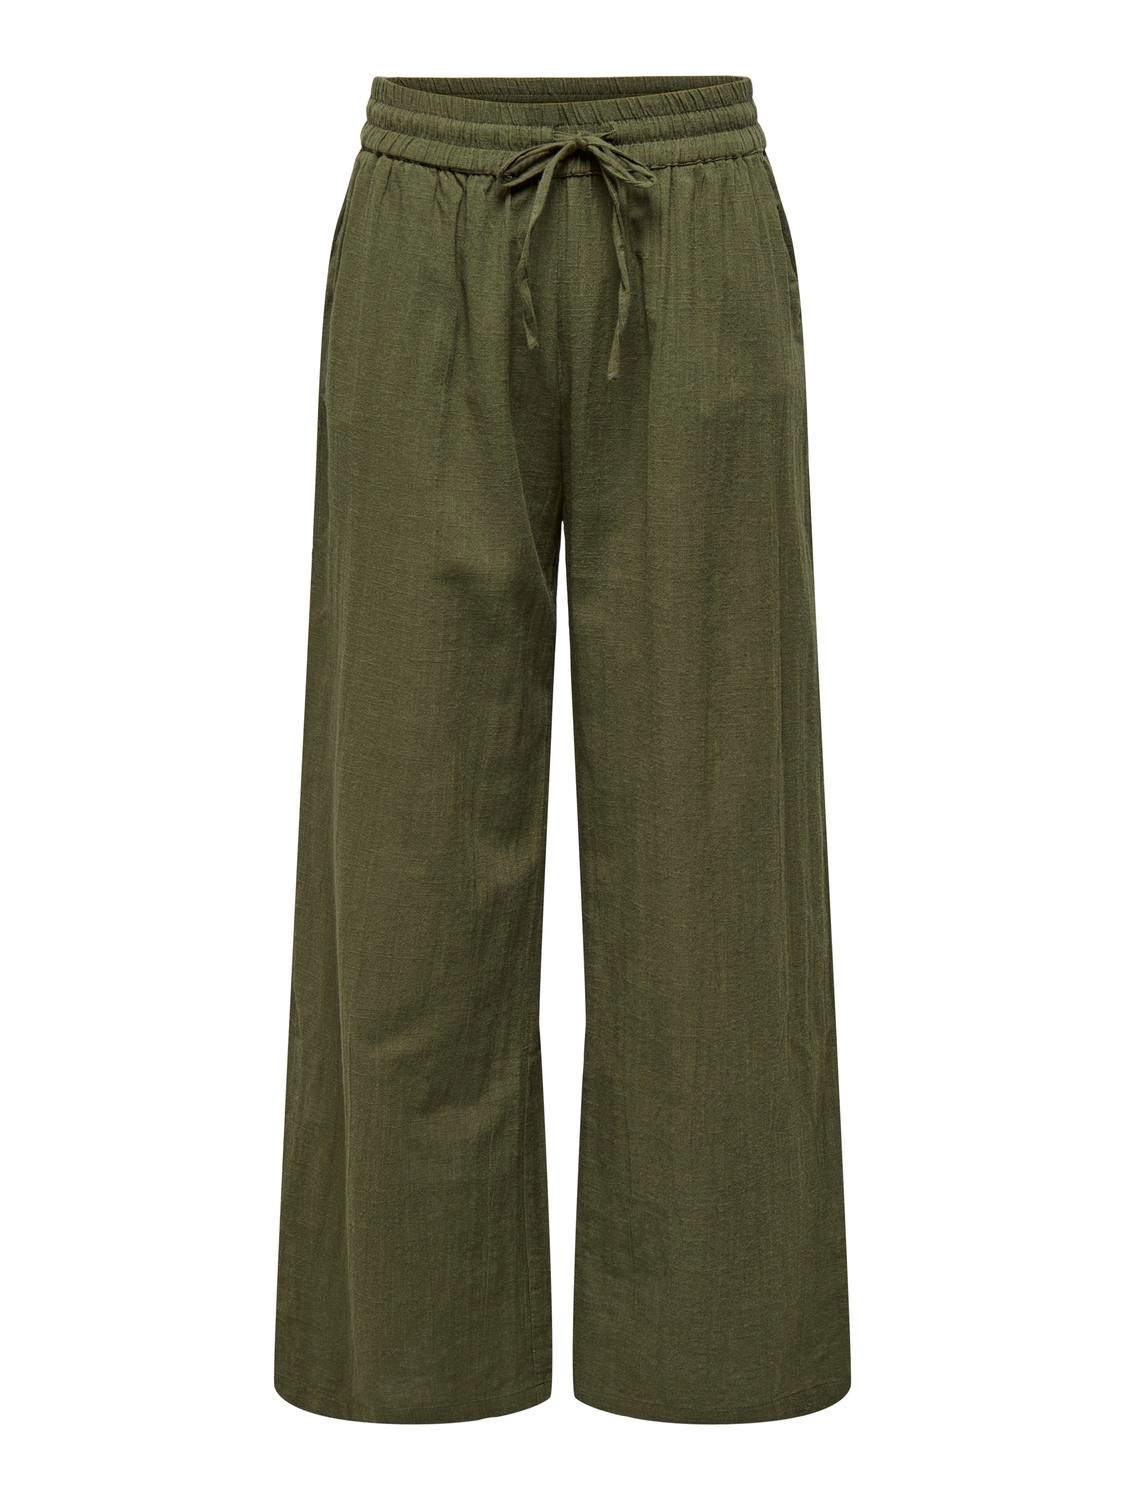 ONLY Regular Fit Trousers -Grape Leaf - 15319090